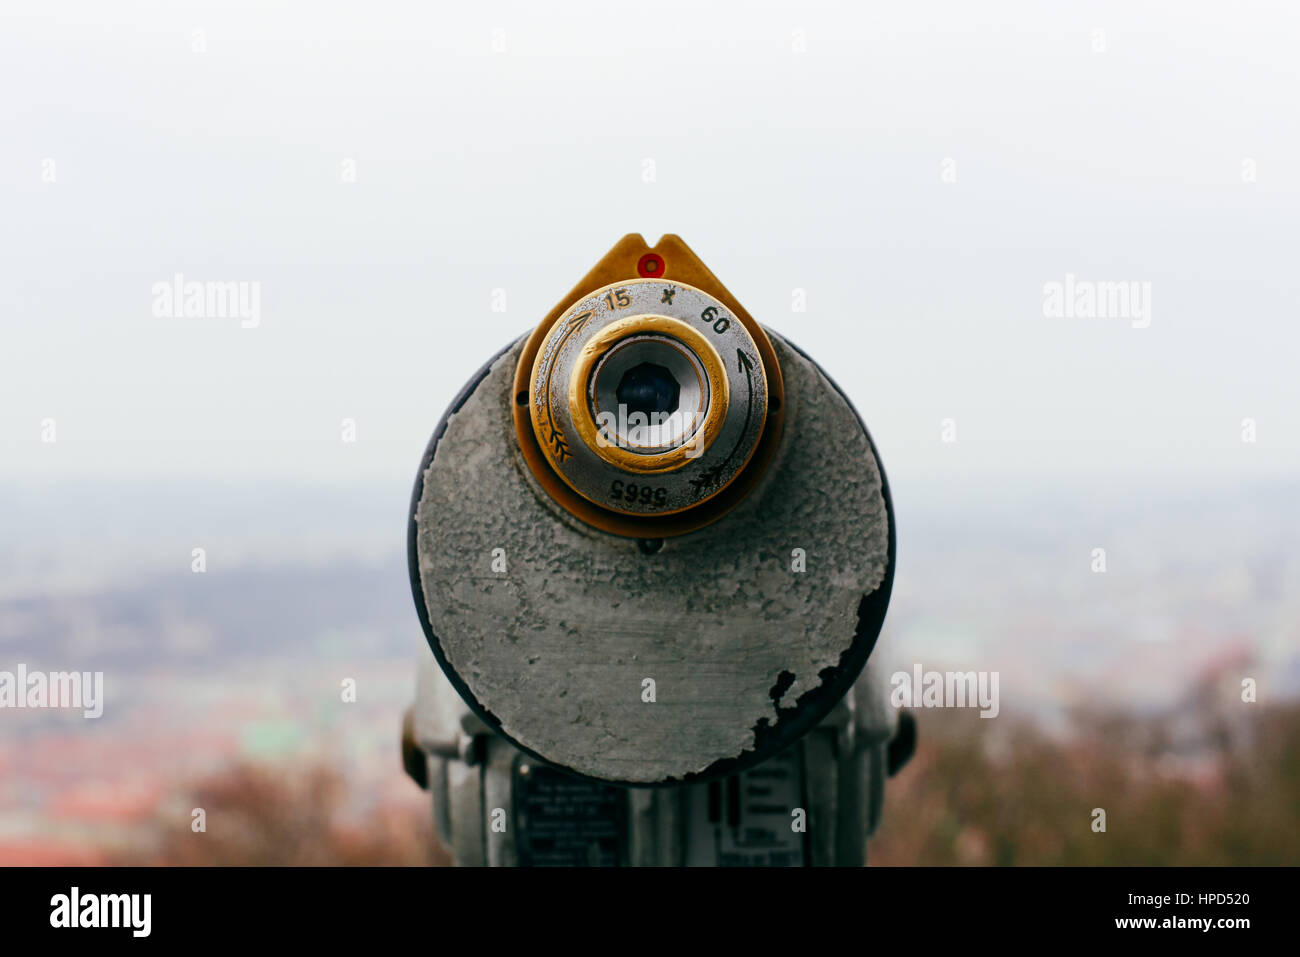 Coin operated binoculars on the viewing platform at Petrin Observation Tower, Prague, Czech Republic with the blurred city background. Stock Photo